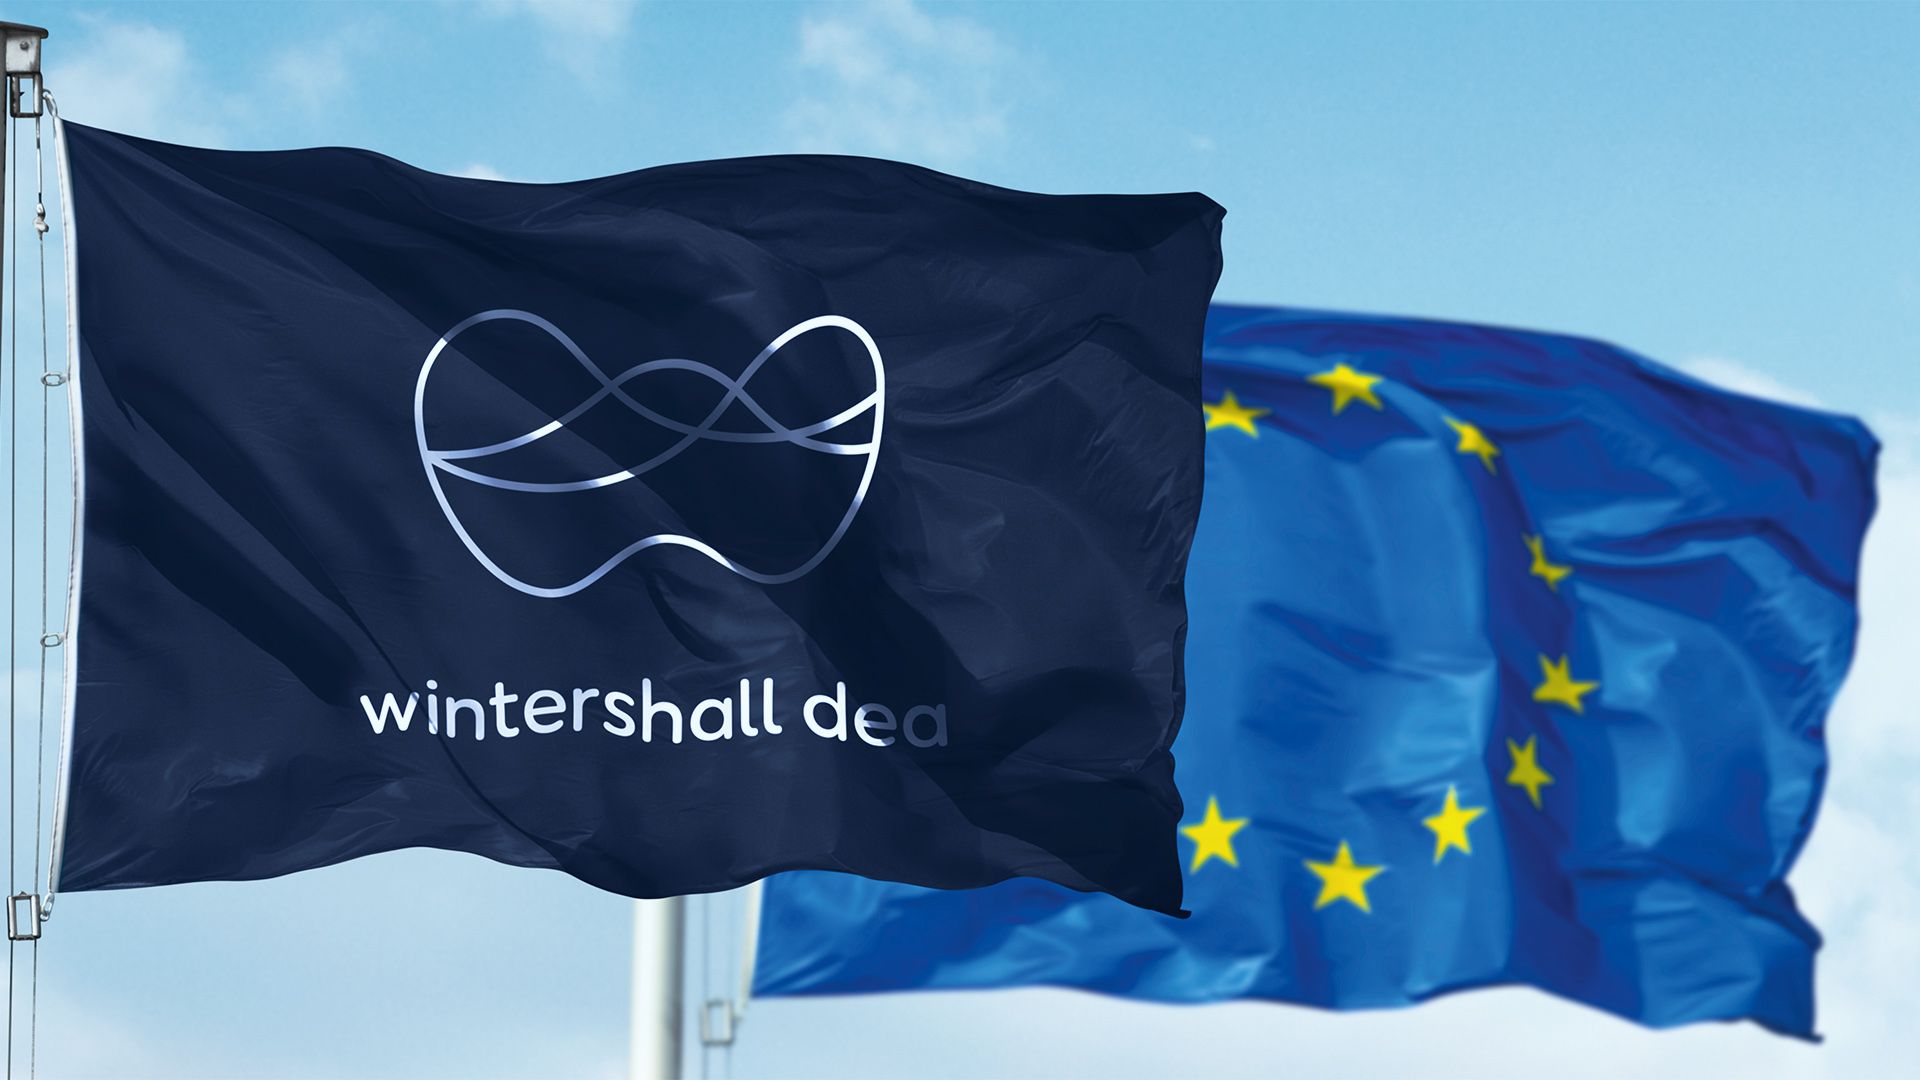 Wintershall Dea on the European Commisson's "Fit for 55" Package